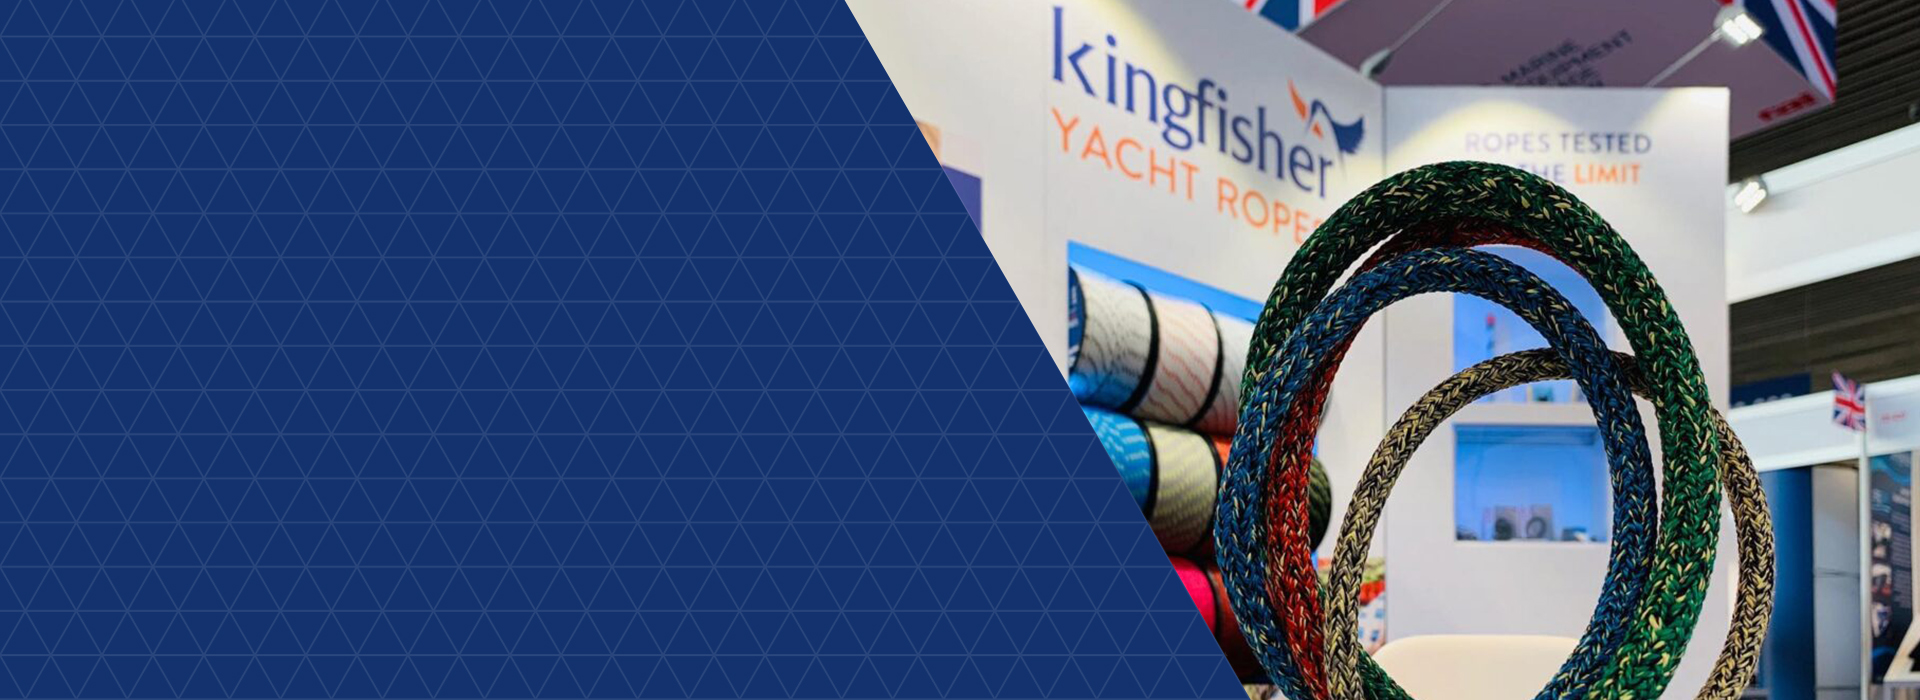 Kingfisher Yacht Ropes at the Marine Equipment Trade Show in Amsterdam